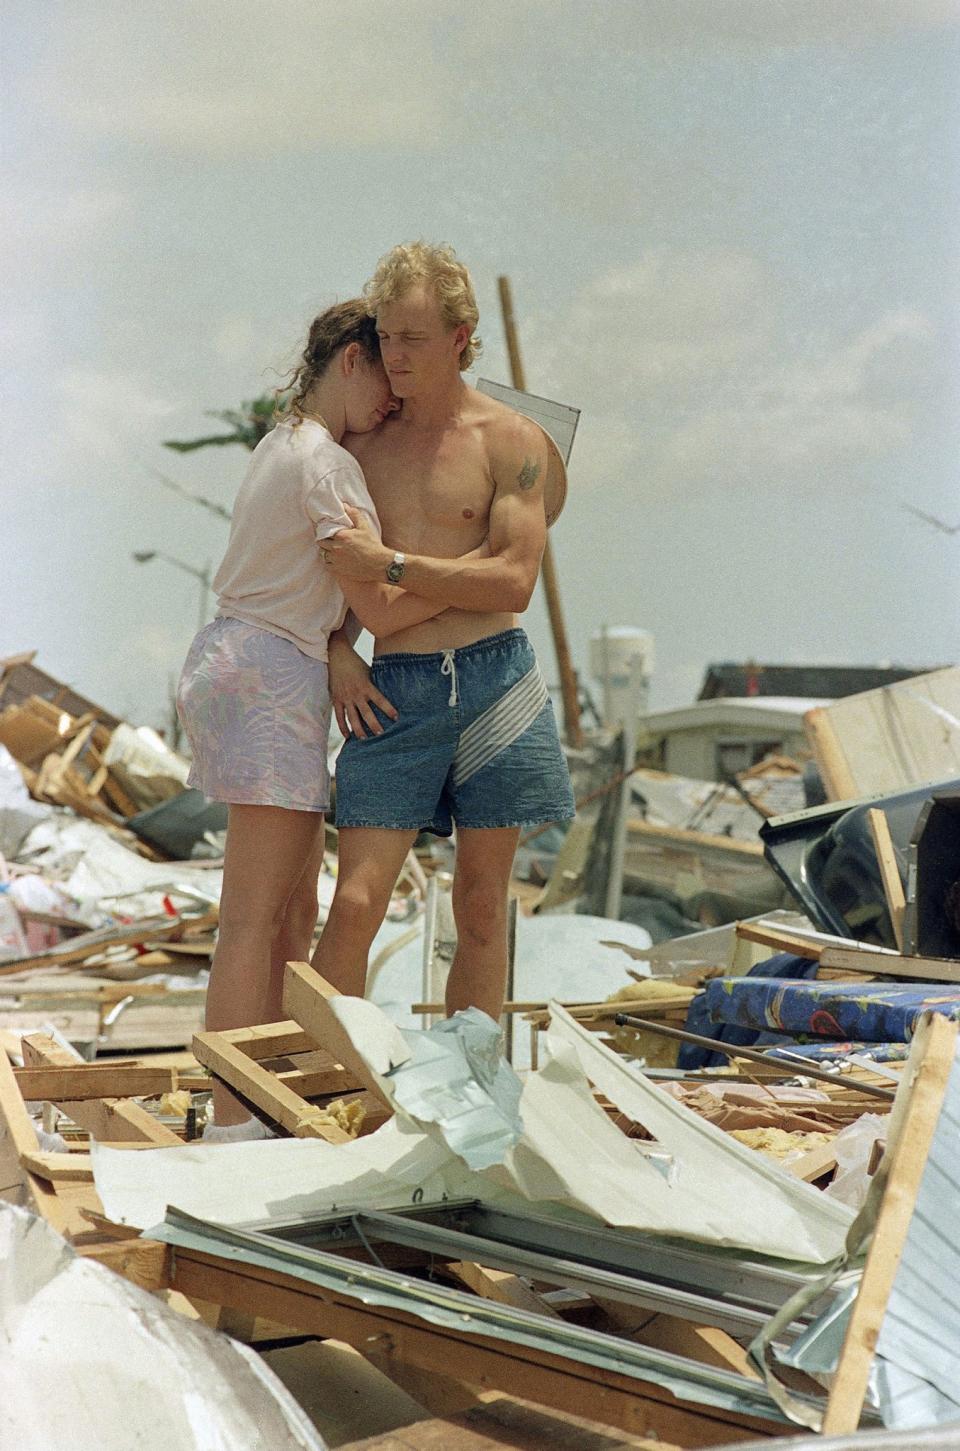 25th anniversary of Hurricane Andrew – A look back